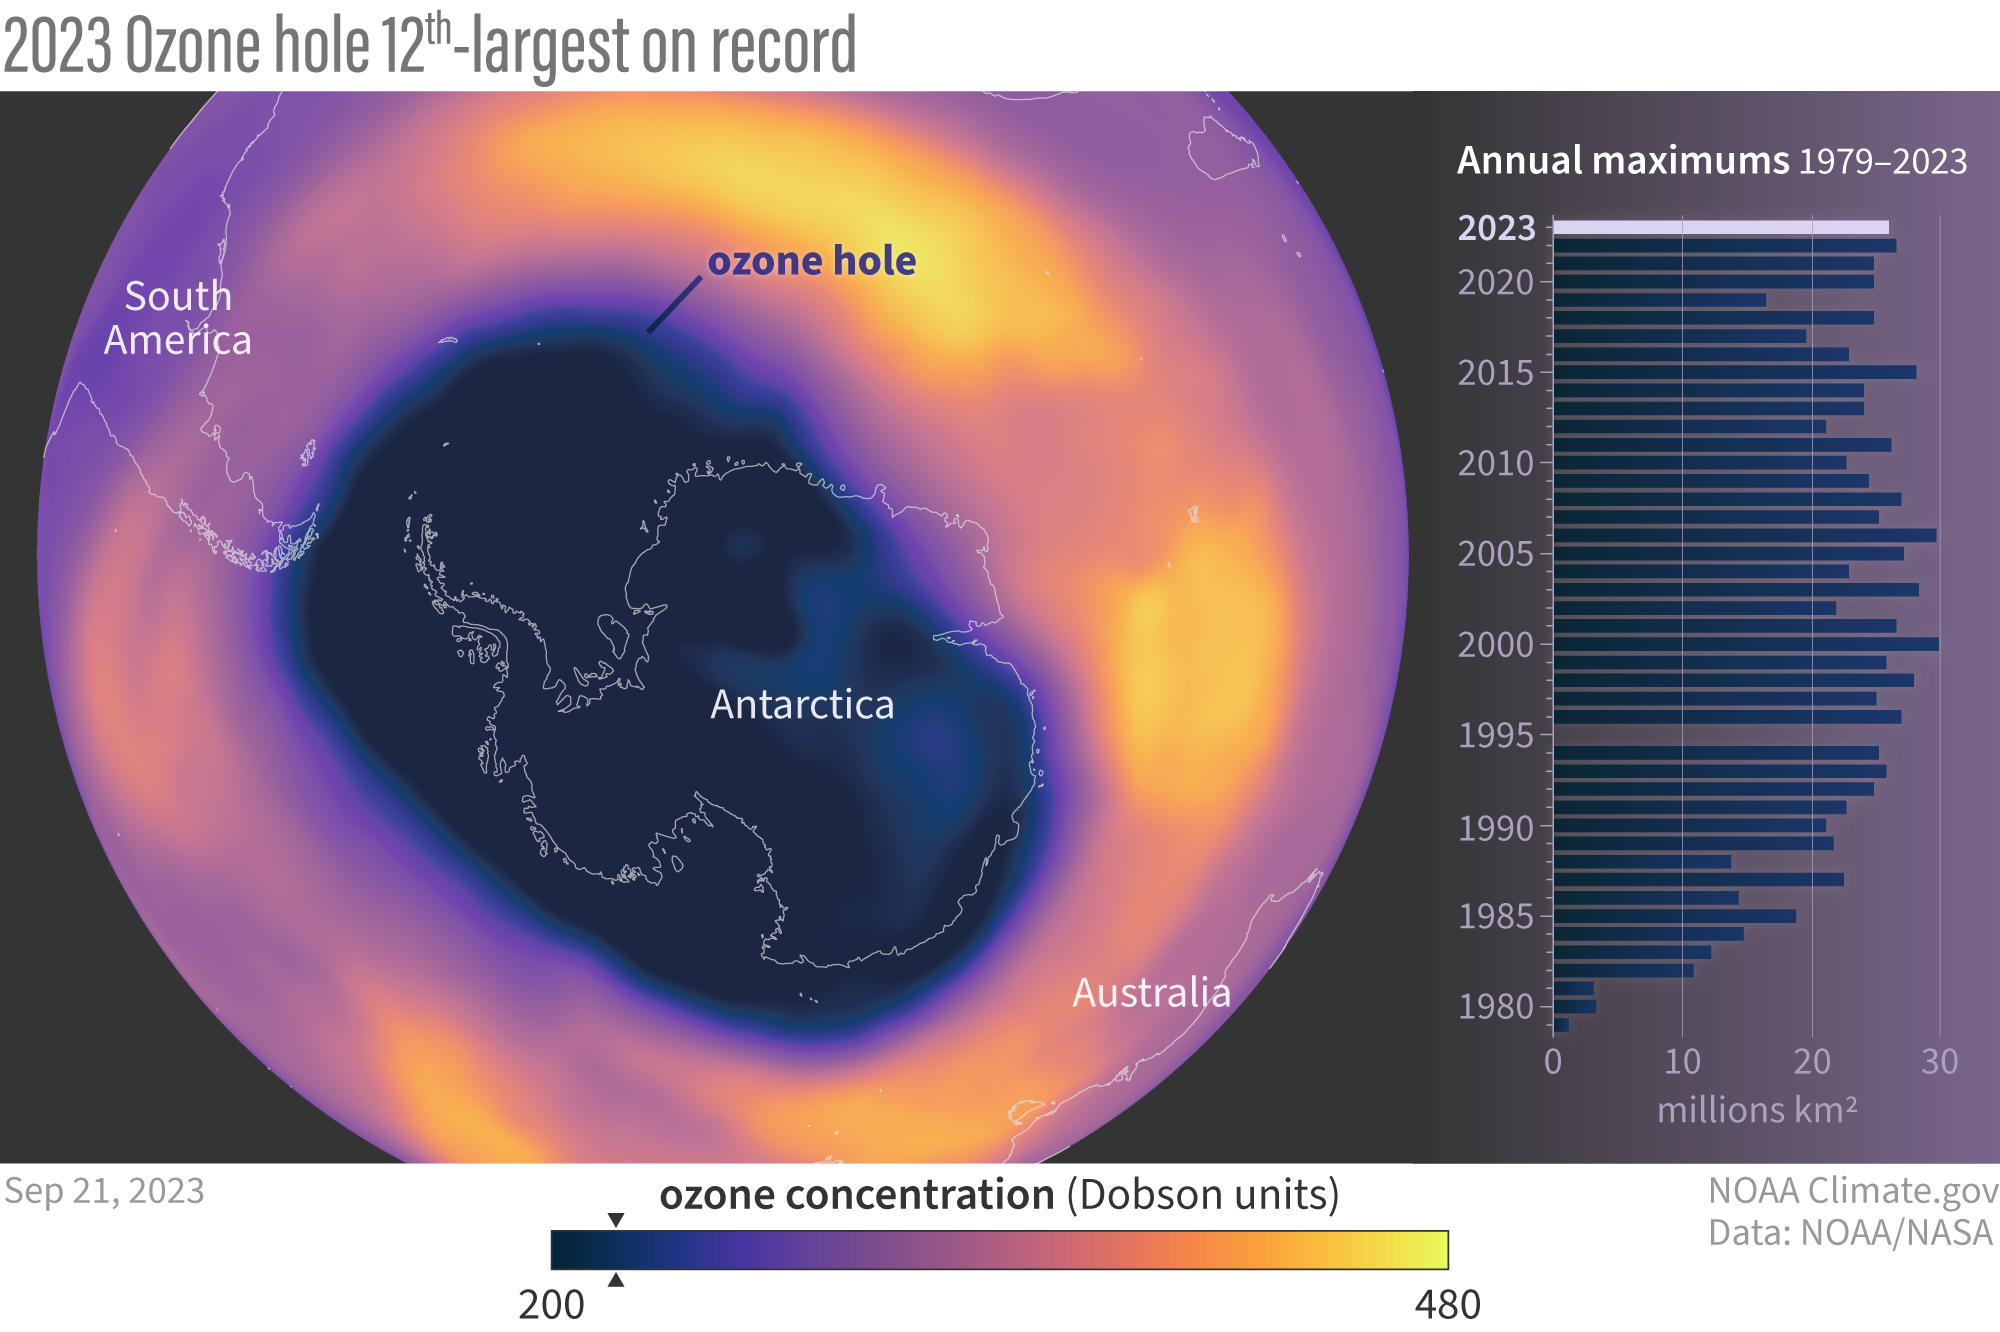 The Antarctic ozone hole—the total area where ozone amounts are below 220 Dobson units—on September 21, 2023, the day of its largest extent for the year. (graph) The annual maximum extent of the ozone hole in 2023 (light purple bar, measured in millions of square kilometers) compared to all years in the satellite record (dark bars). NOAA Climate.gov image based on NOAA (map) and NASA (graph) satellite data.